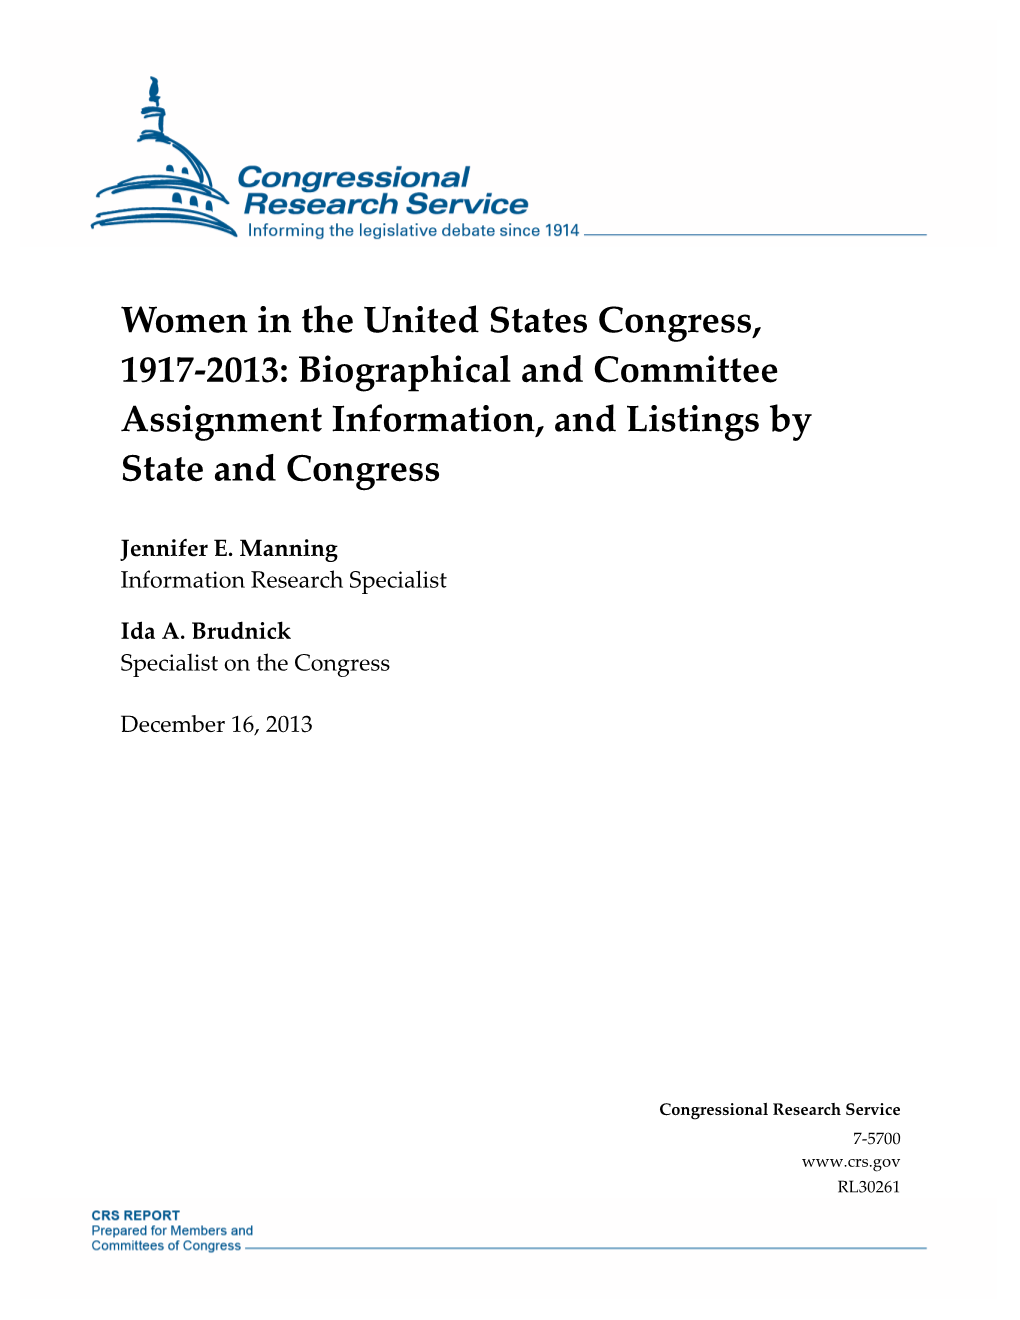 Women in the United States Congress, 1917-2013: Biographical and Committee Assignment Information, and Listings by State and Congress